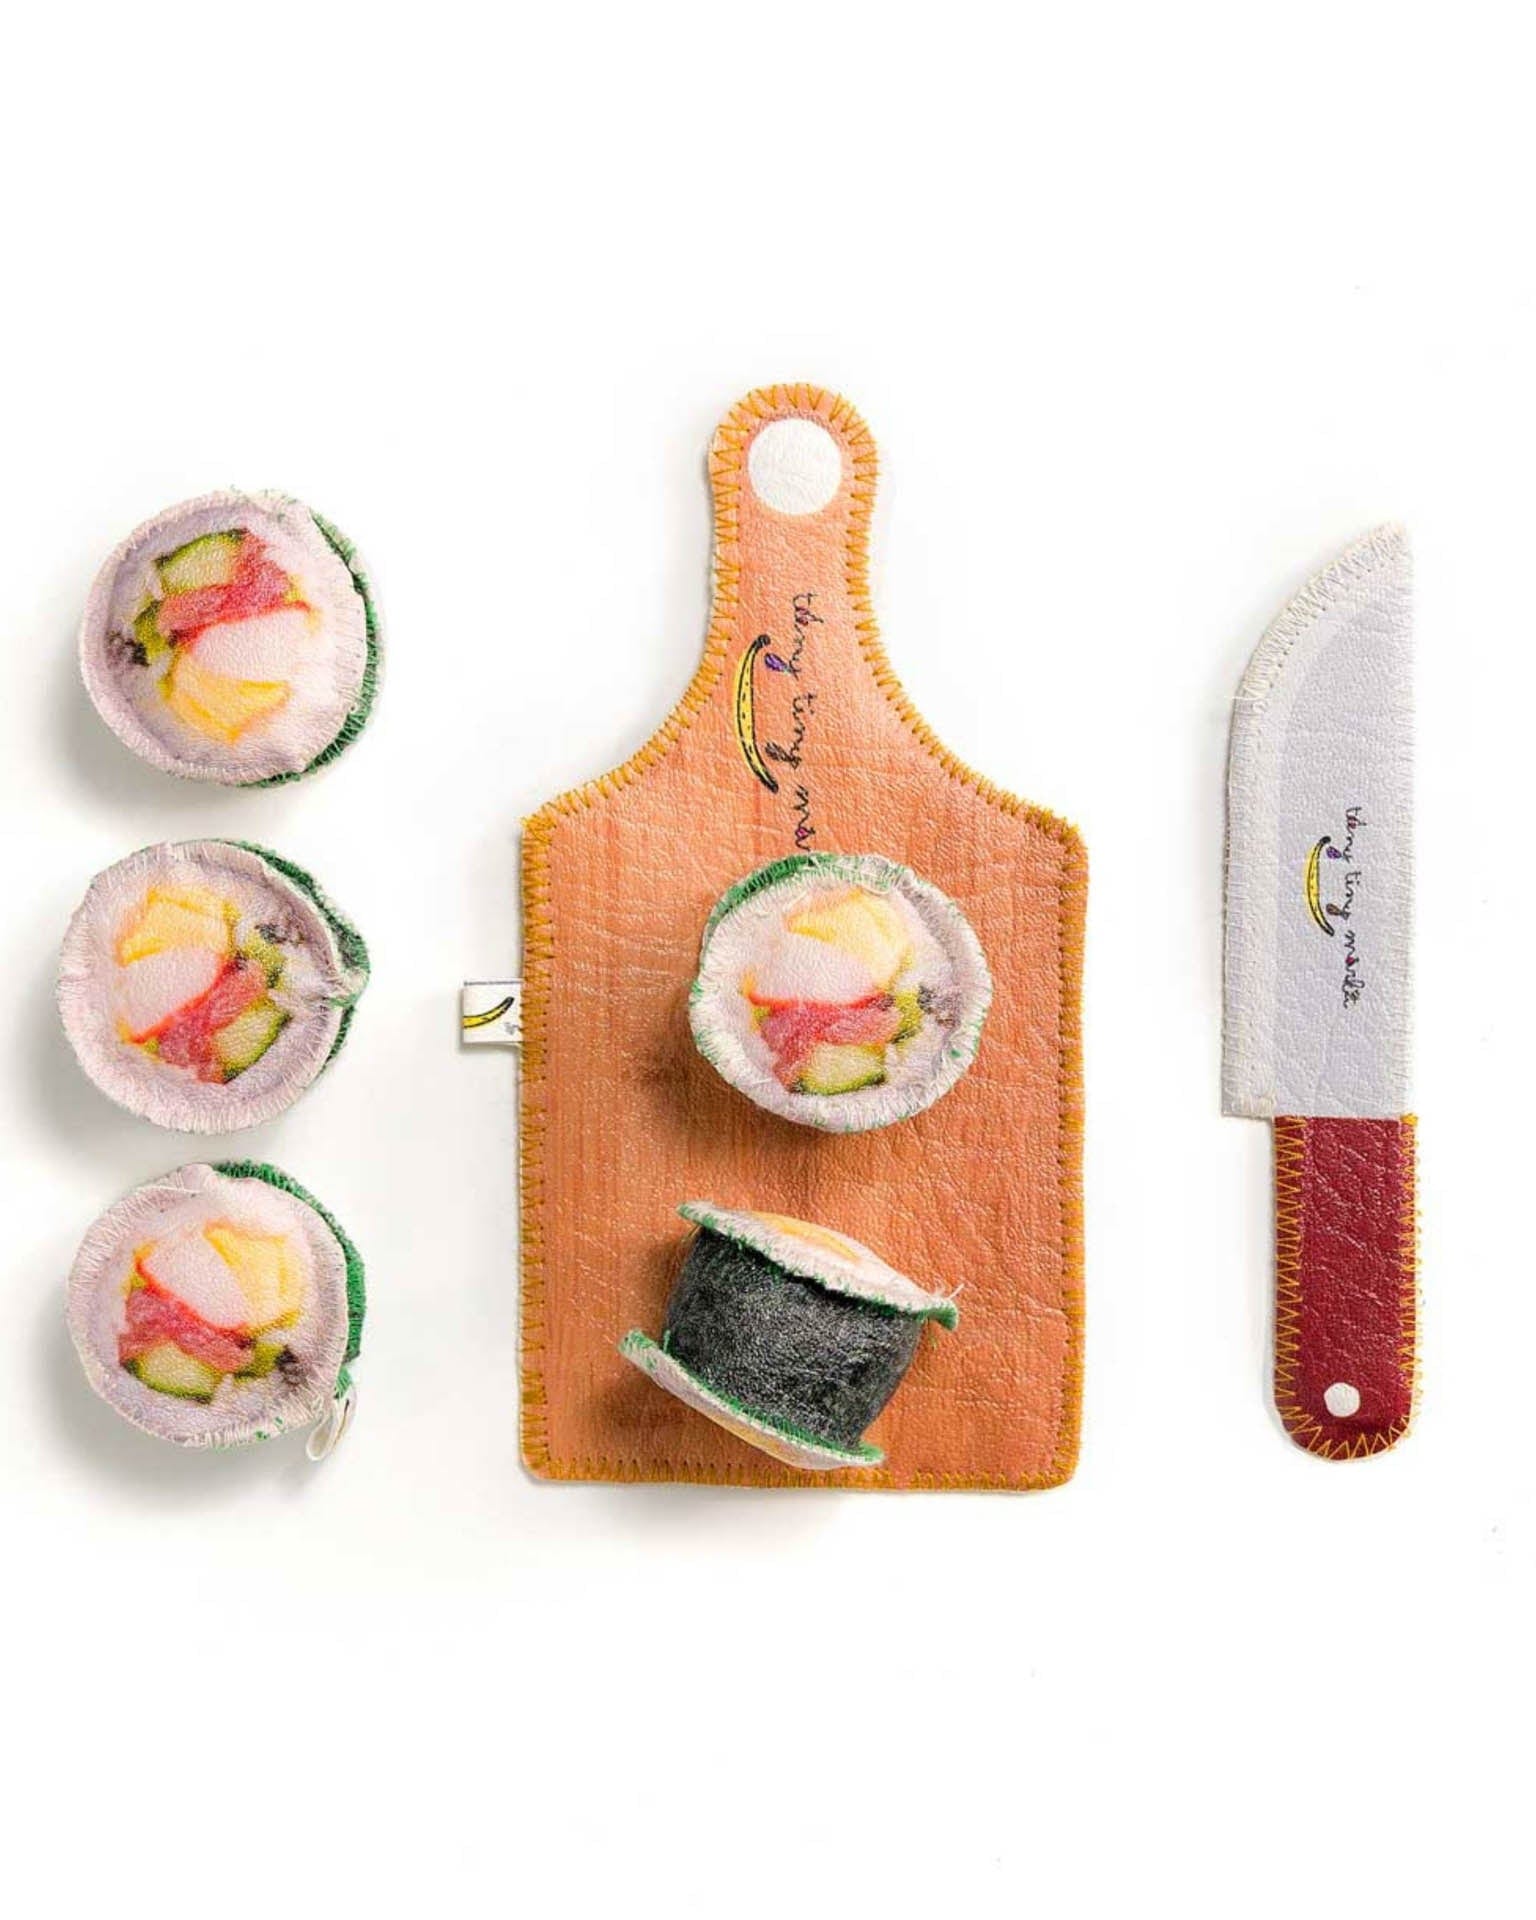 Where To Buy A Quality Sushi Kit